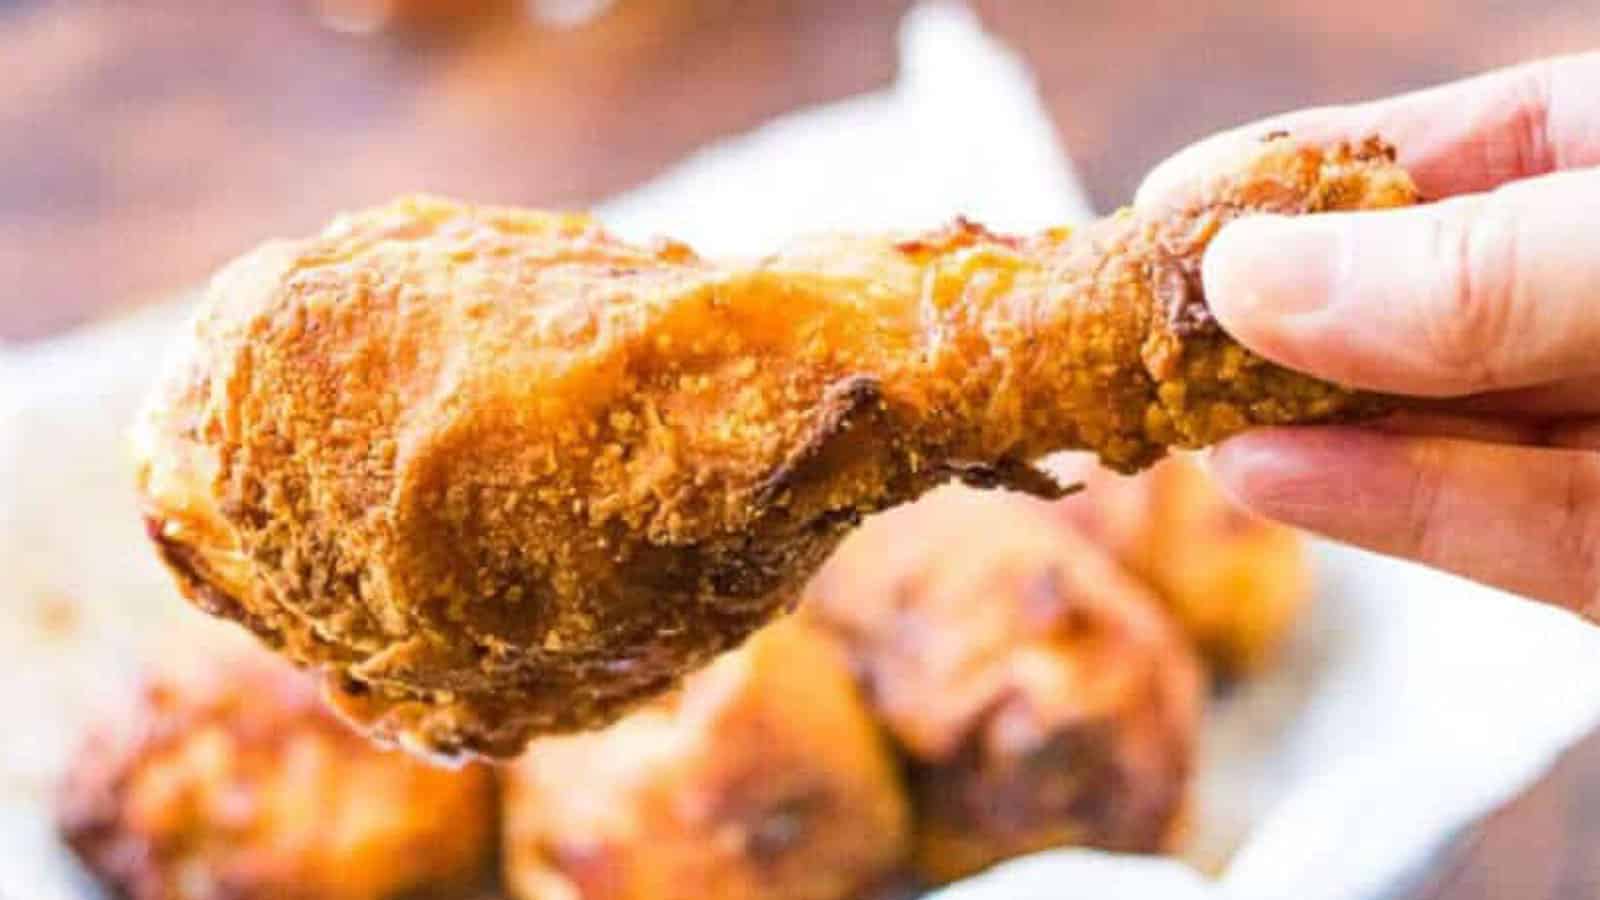 <p>If you love crispy, juicy chicken, this air fryer Buttermilk Fried Chicken is a real game changer. The secret is in the air fryer, making it healthier without compromising on taste. Each bite is pure delight!<br><strong>Get the Recipe: </strong><a href="https://allwaysdelicious.com/air-fryer-buttermilk-fried-chicken/?utm_source=msn&utm_medium=page&utm_campaign=msn">Air Fryer Buttermilk Fried Chicken</a></p>